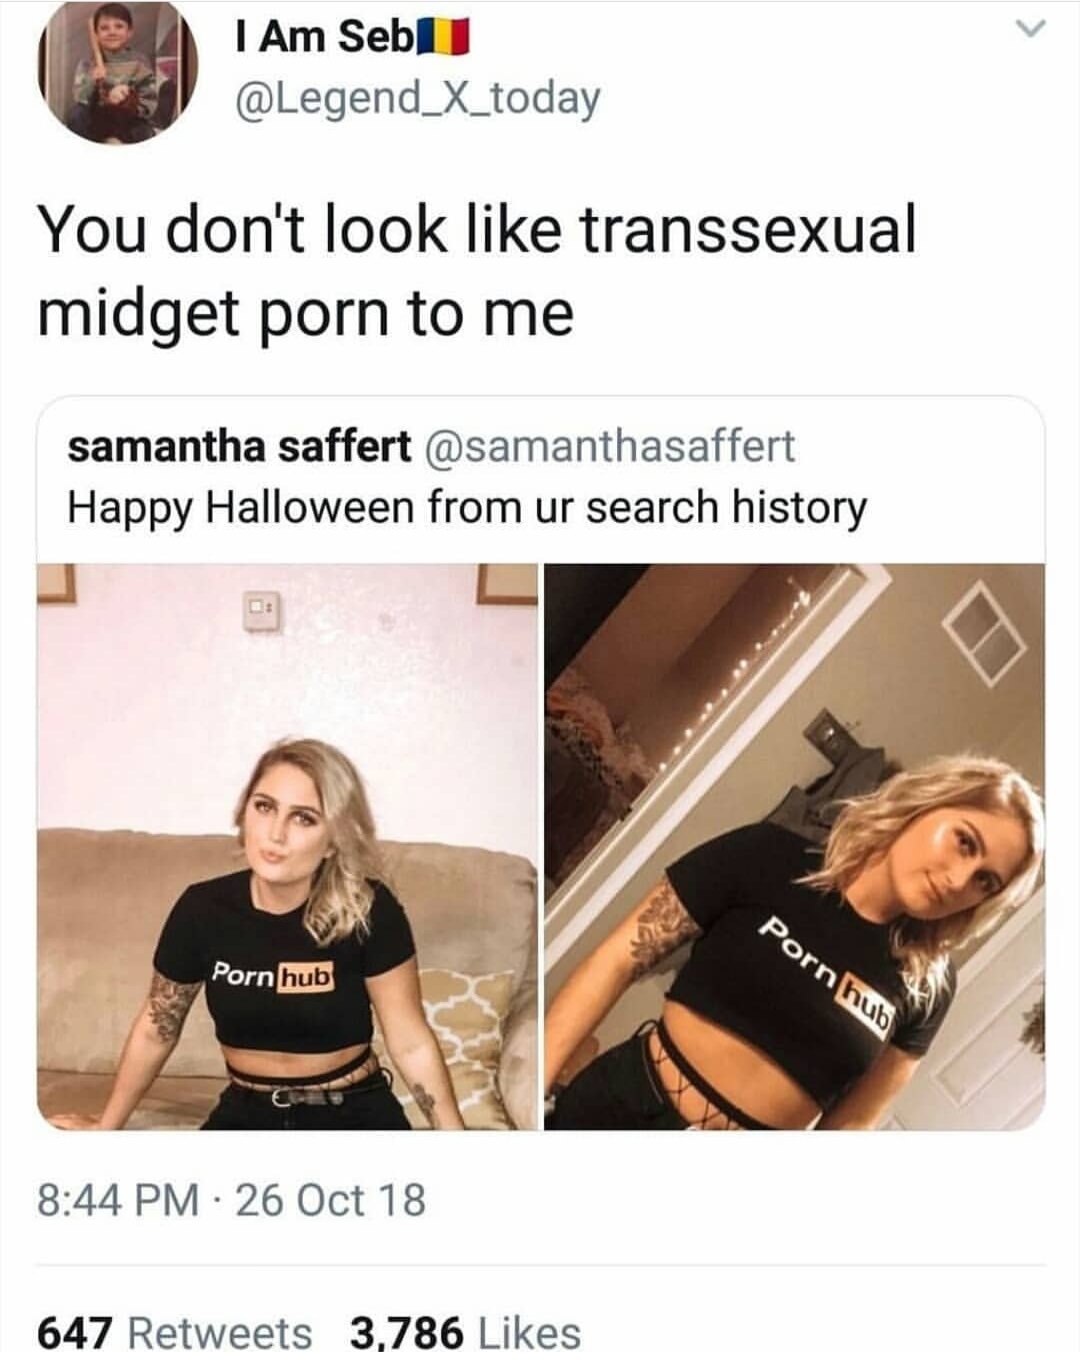 meme tweet of girl who jokes she is writing from his search history and he says you don't look like a transexual midget